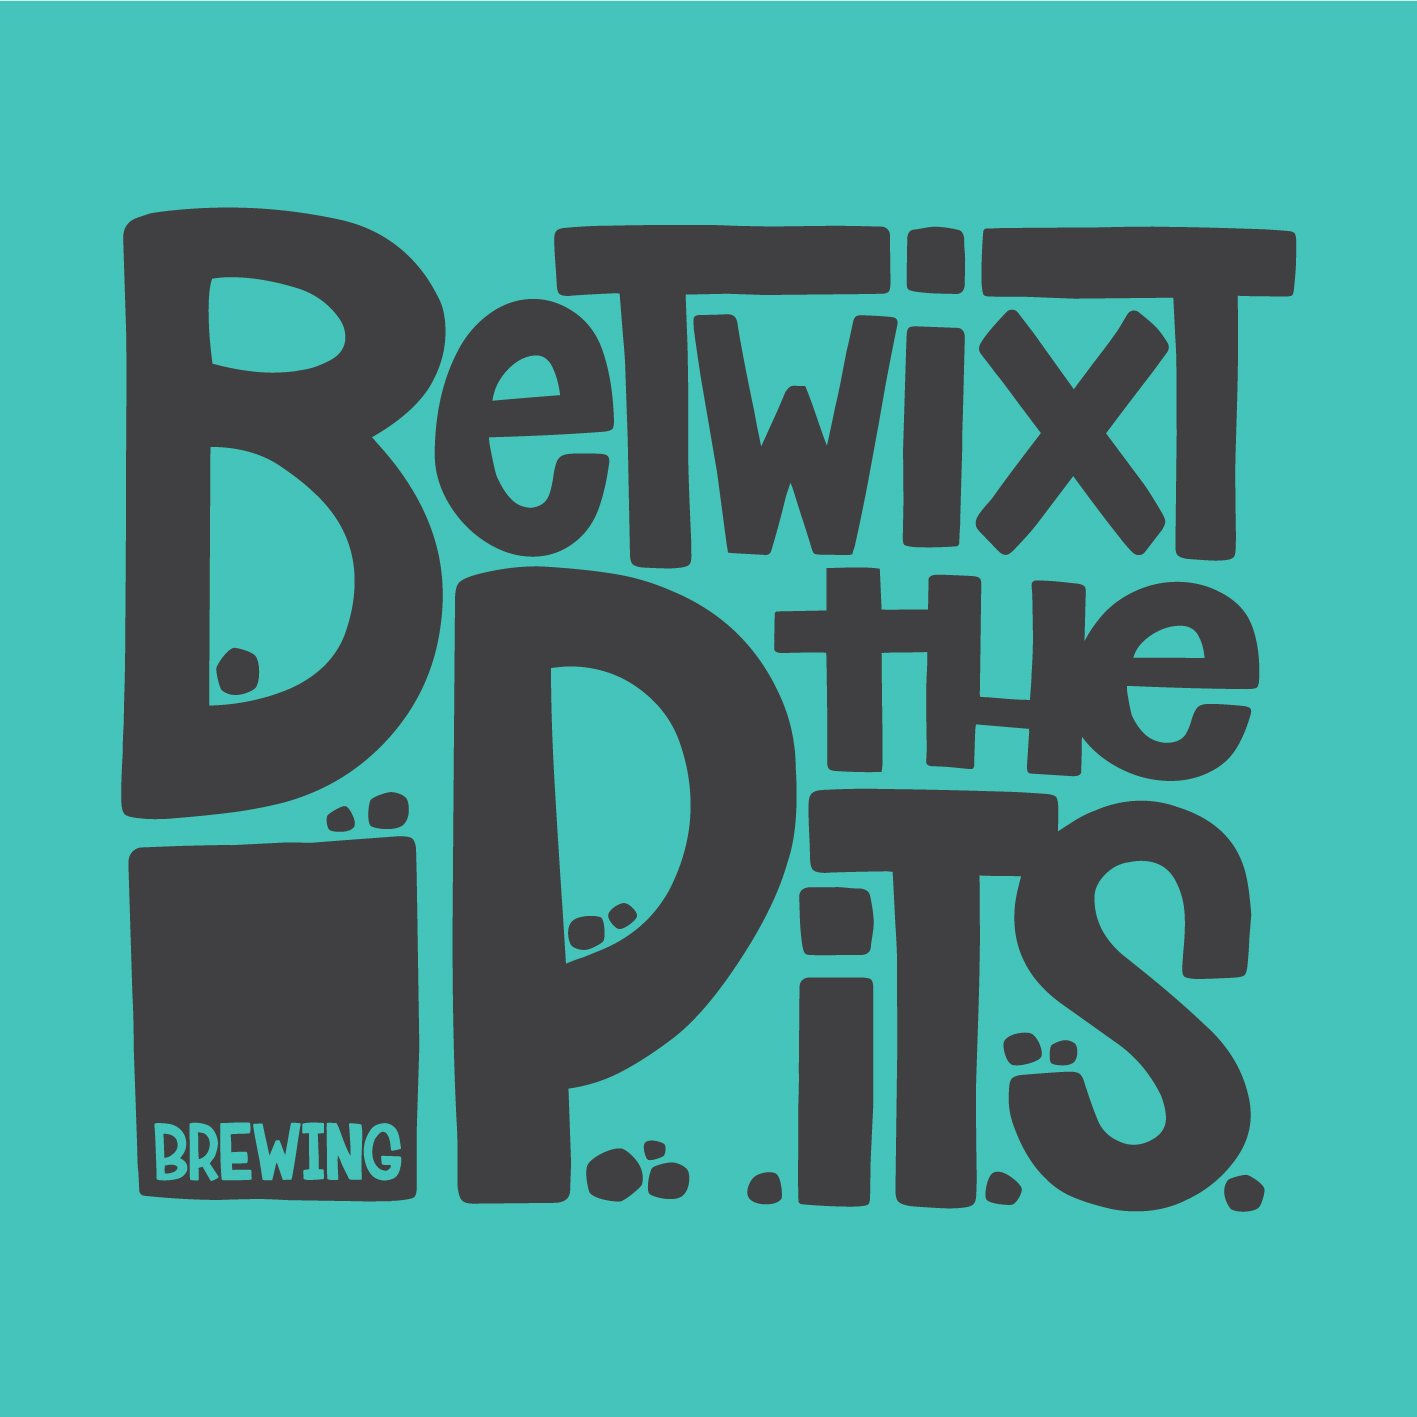 Betwixt the Pits logo design